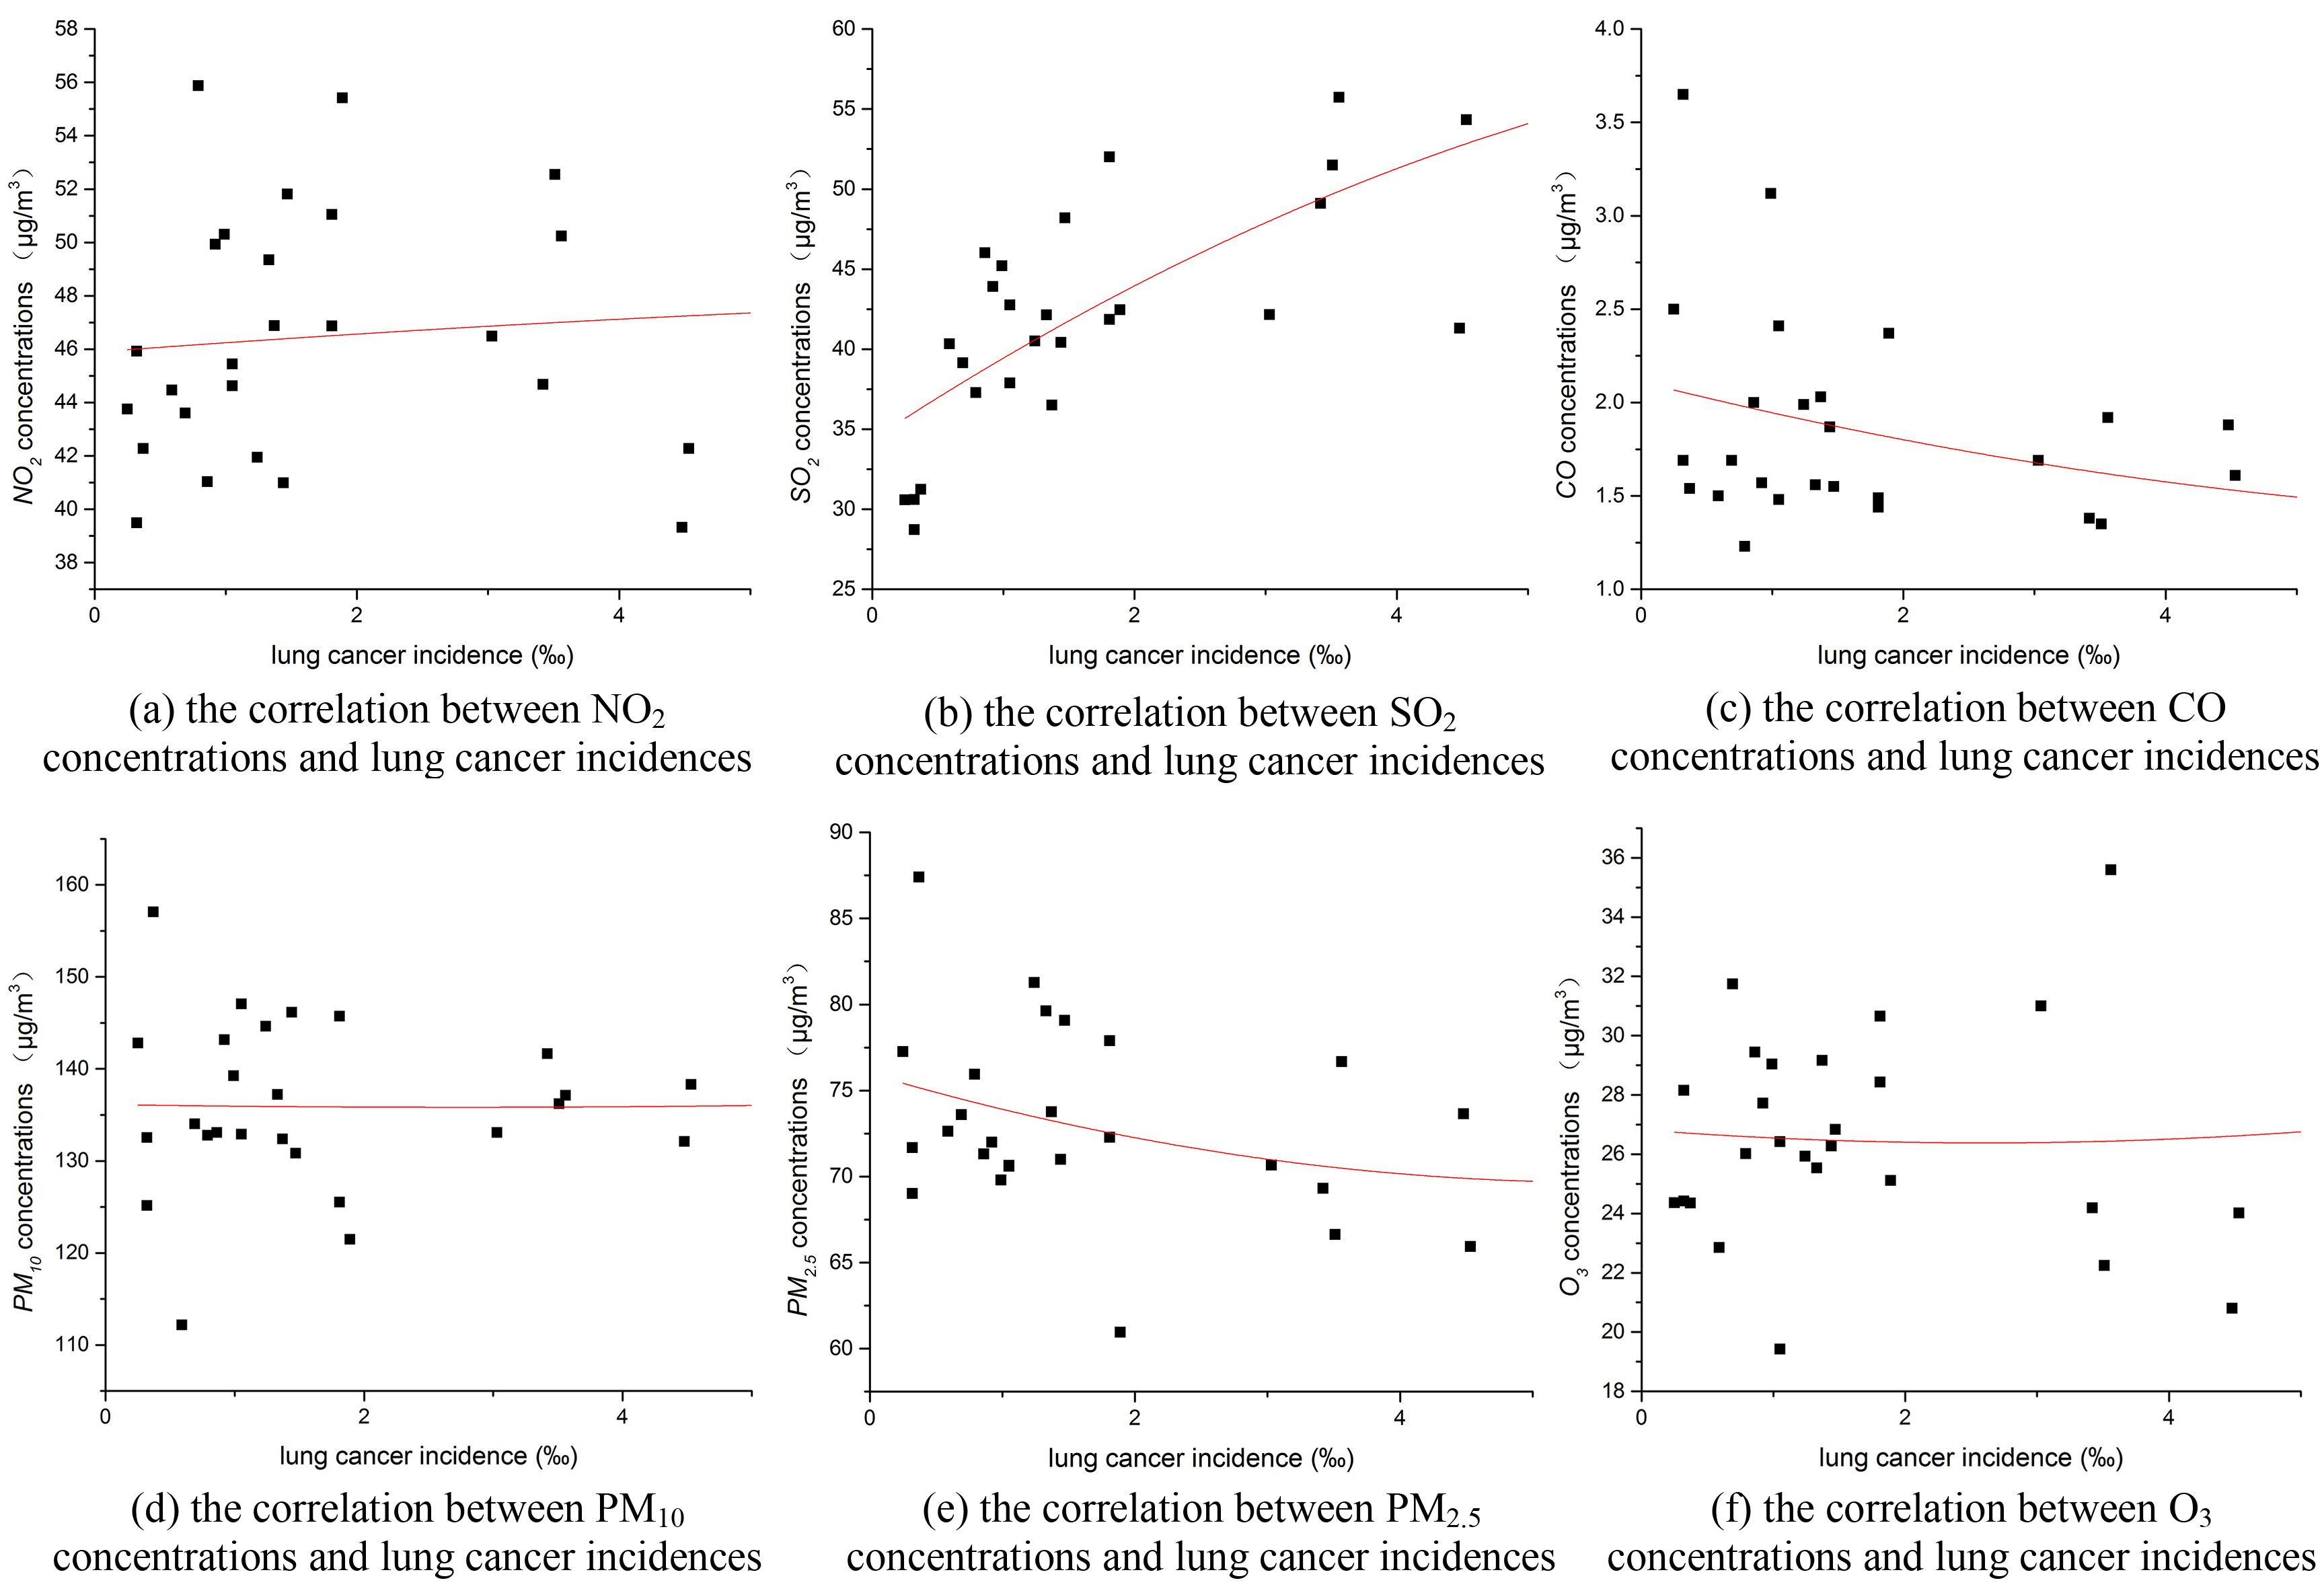 Correlation analysis between different air pollutants and the lung cancer incidences.